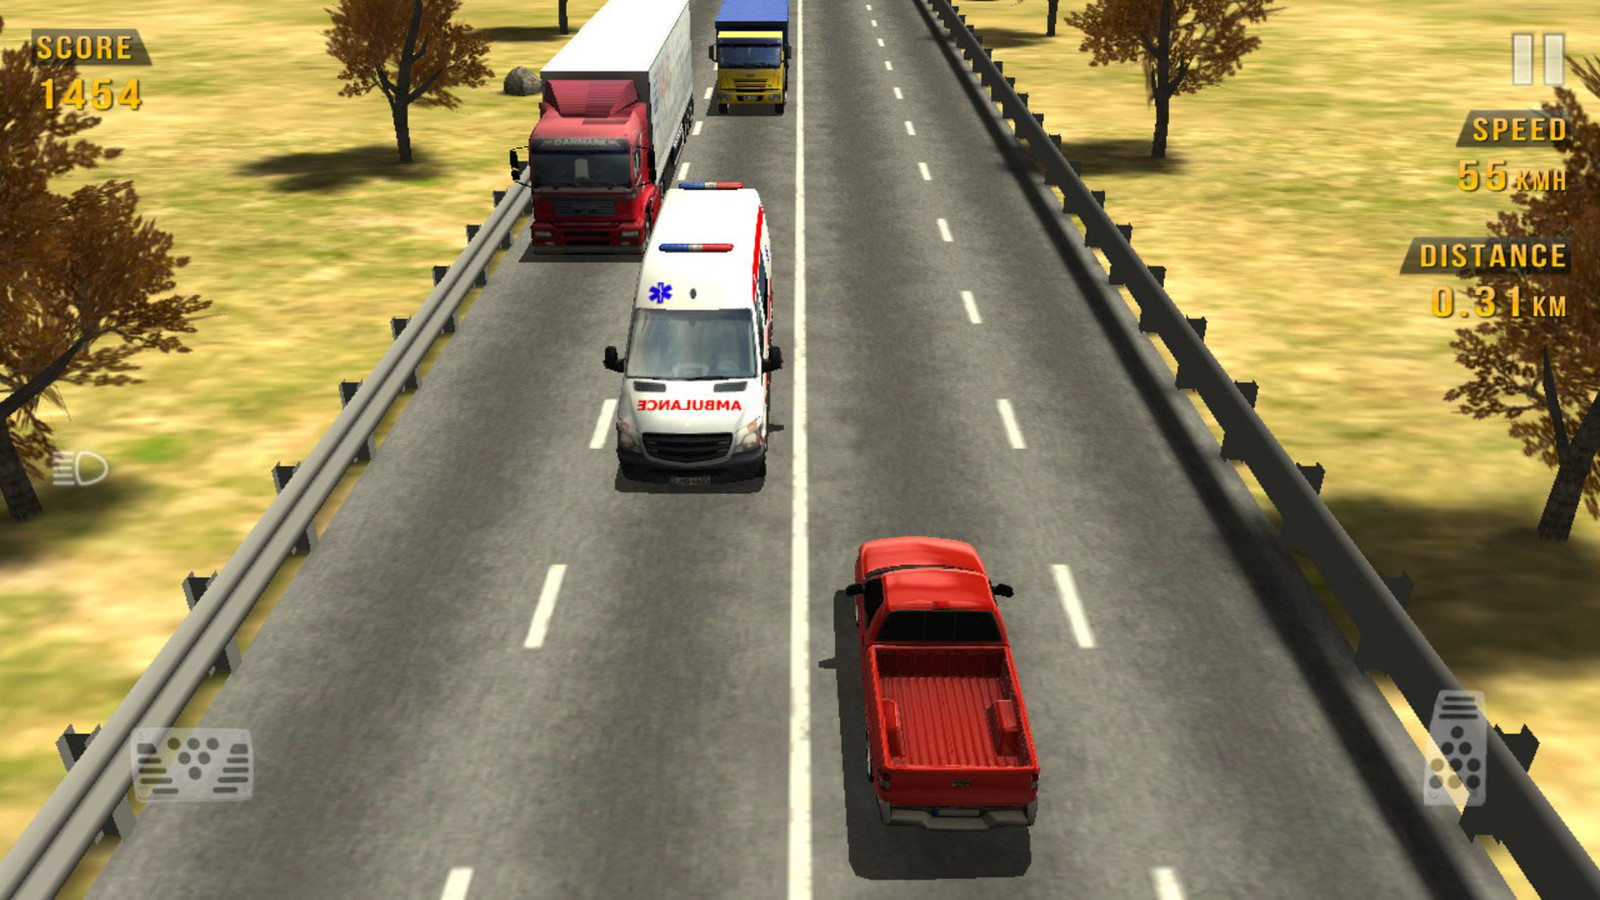 Speed through highways with Traffic Racer for Windows Phone 8